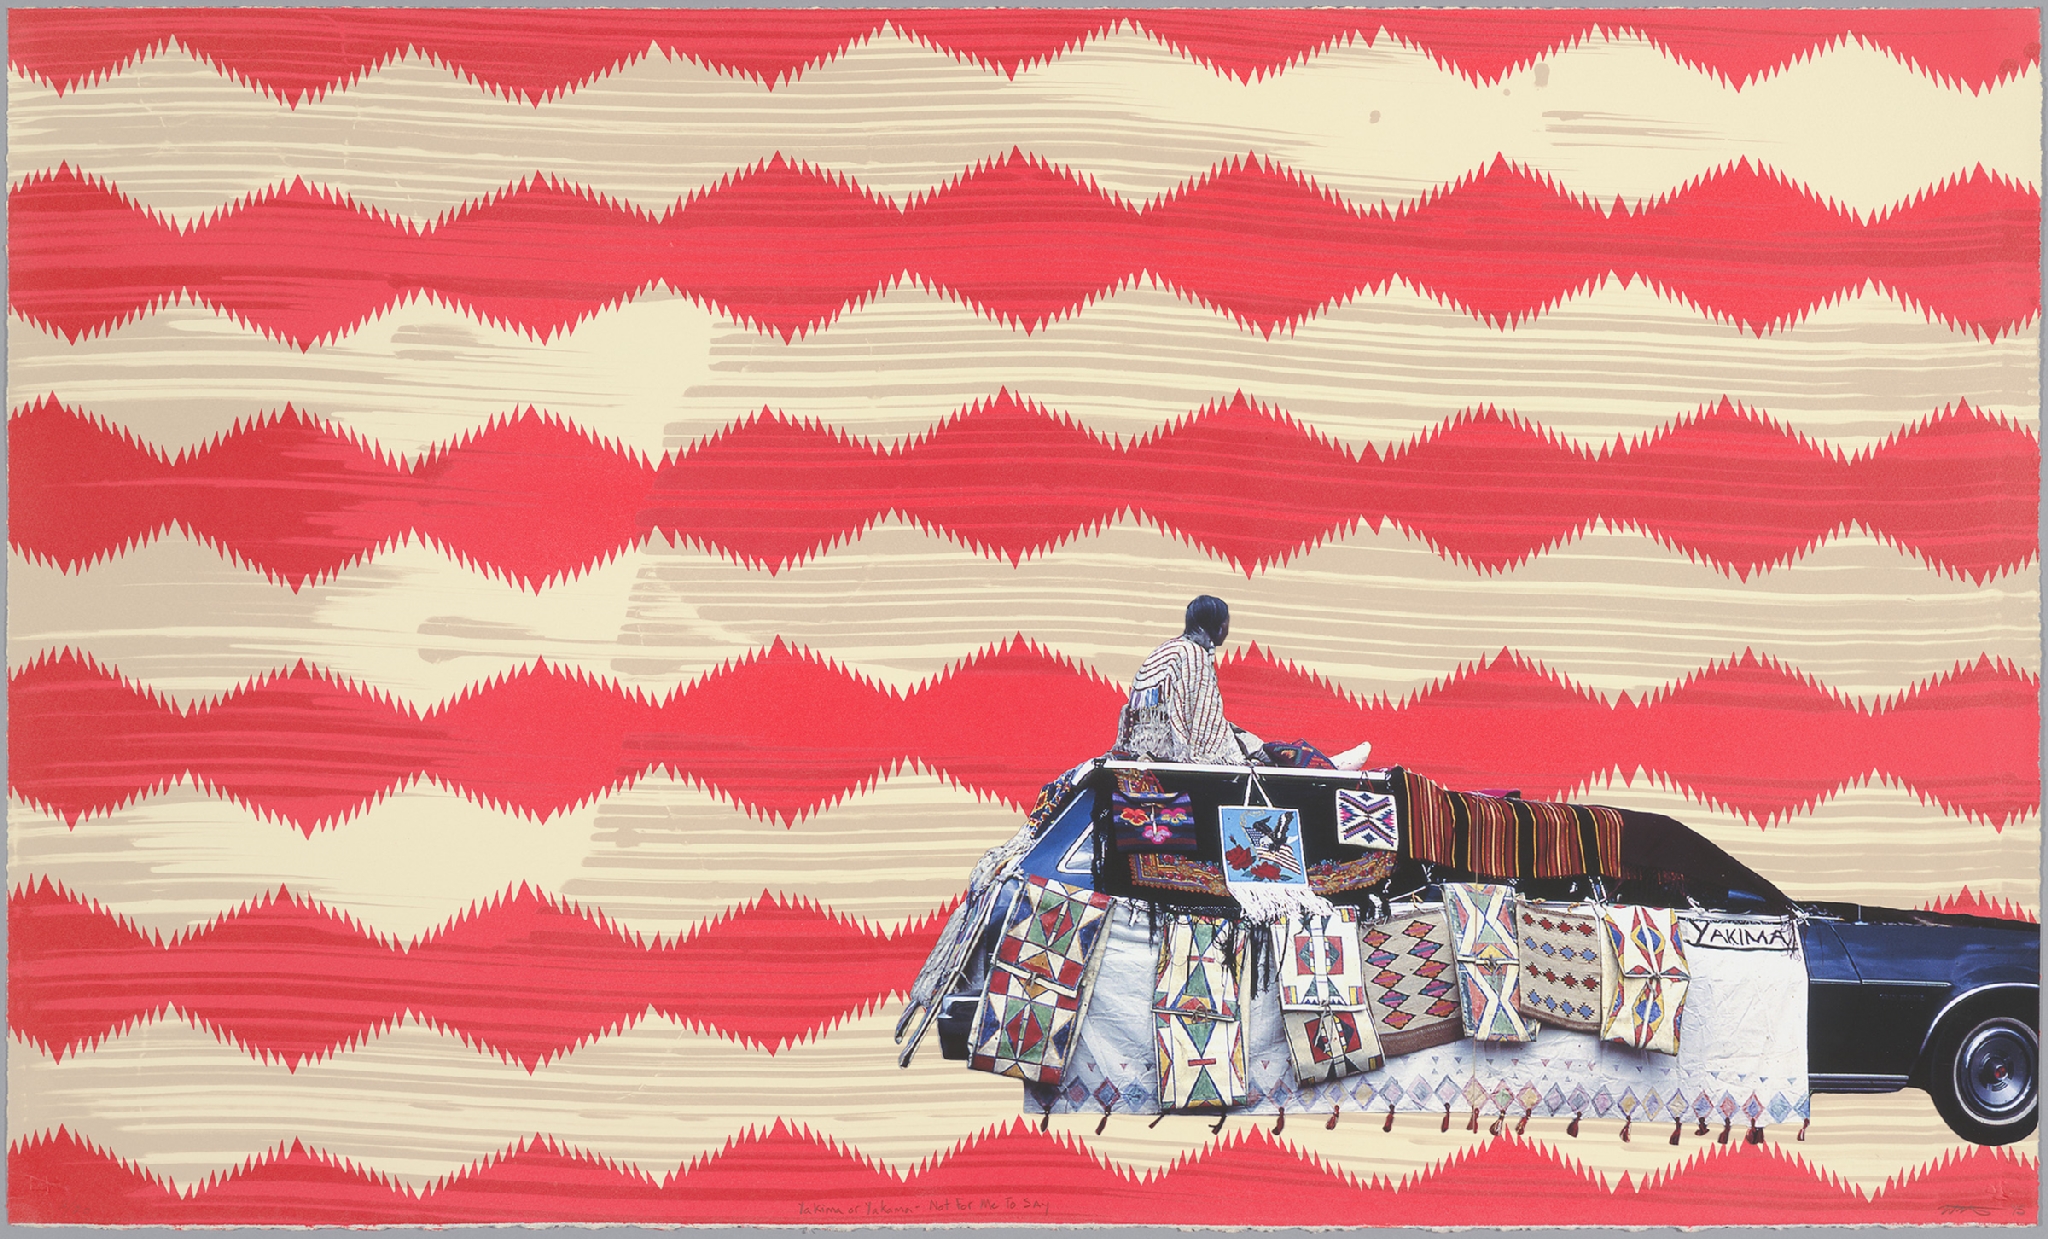 Atop a repeating geometric background of thick red and beige horizontal diamond shapes, a collaged image of a station wagon covered in geometric-patterned Indigenous blankets and tapestries is positioned to the bottom far right. A figure sits on the car's roof, at the very back.